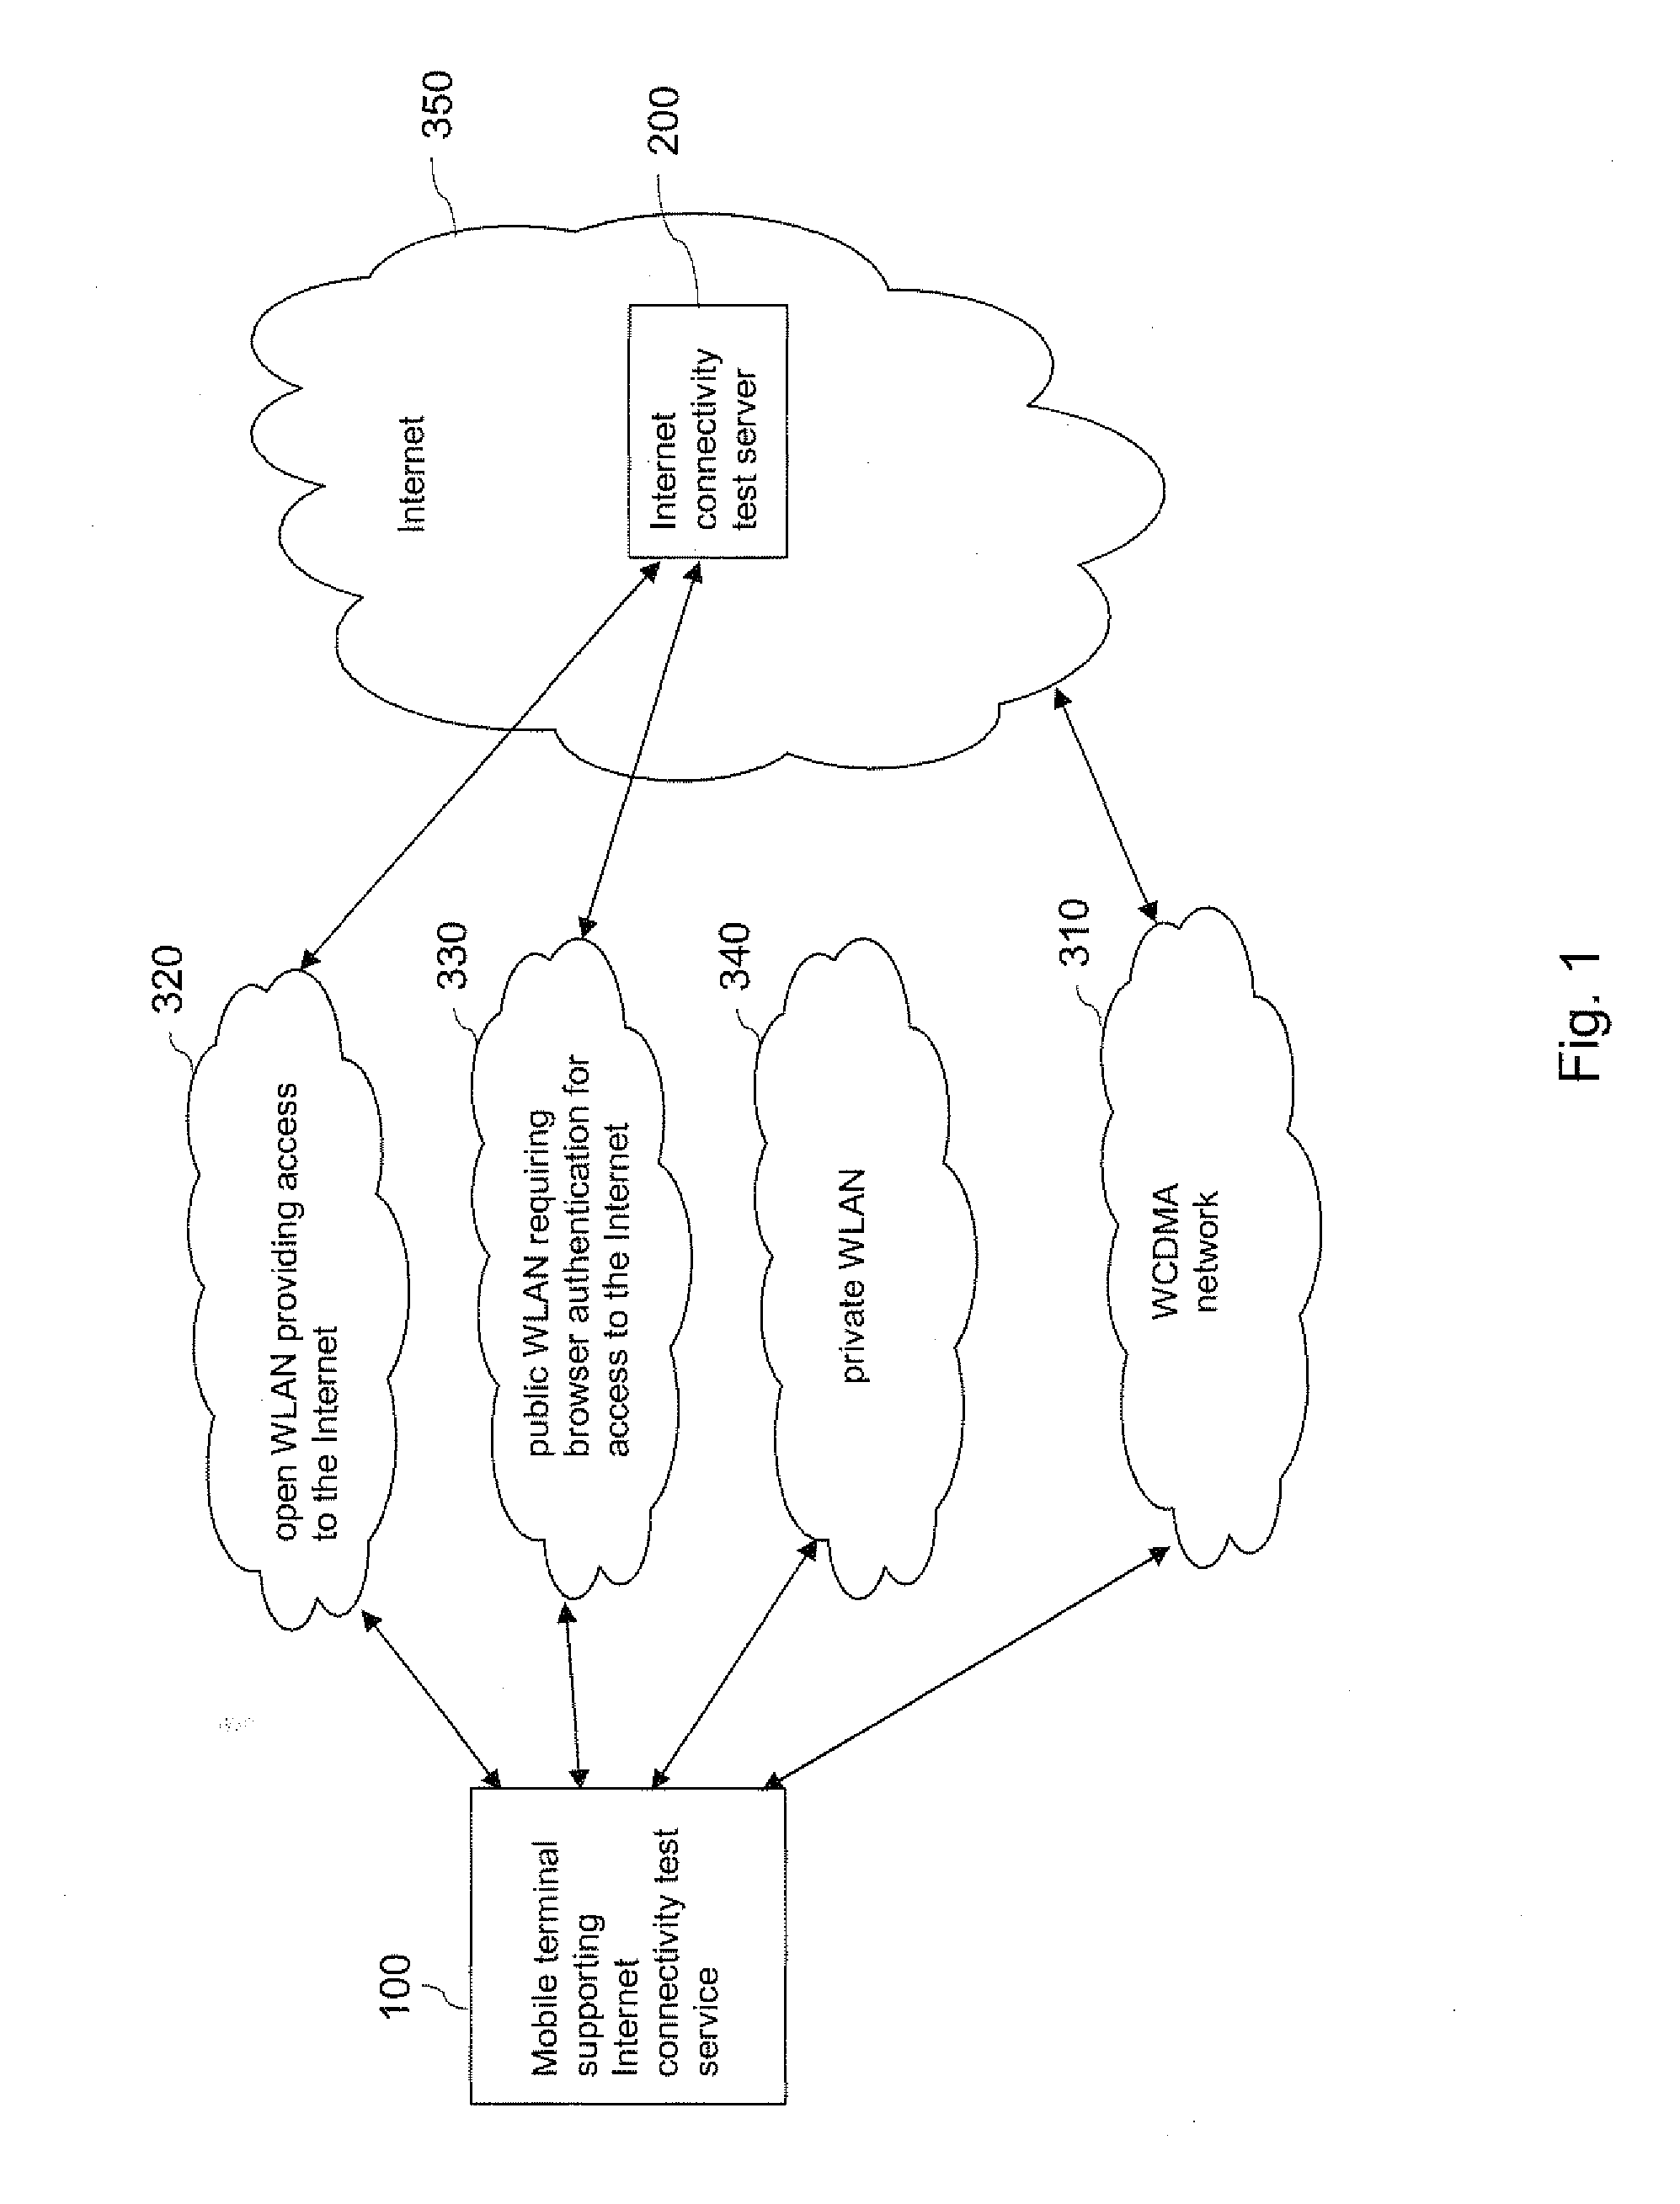 Supporting an Access to a Destination Network Via a Wireless Access Network